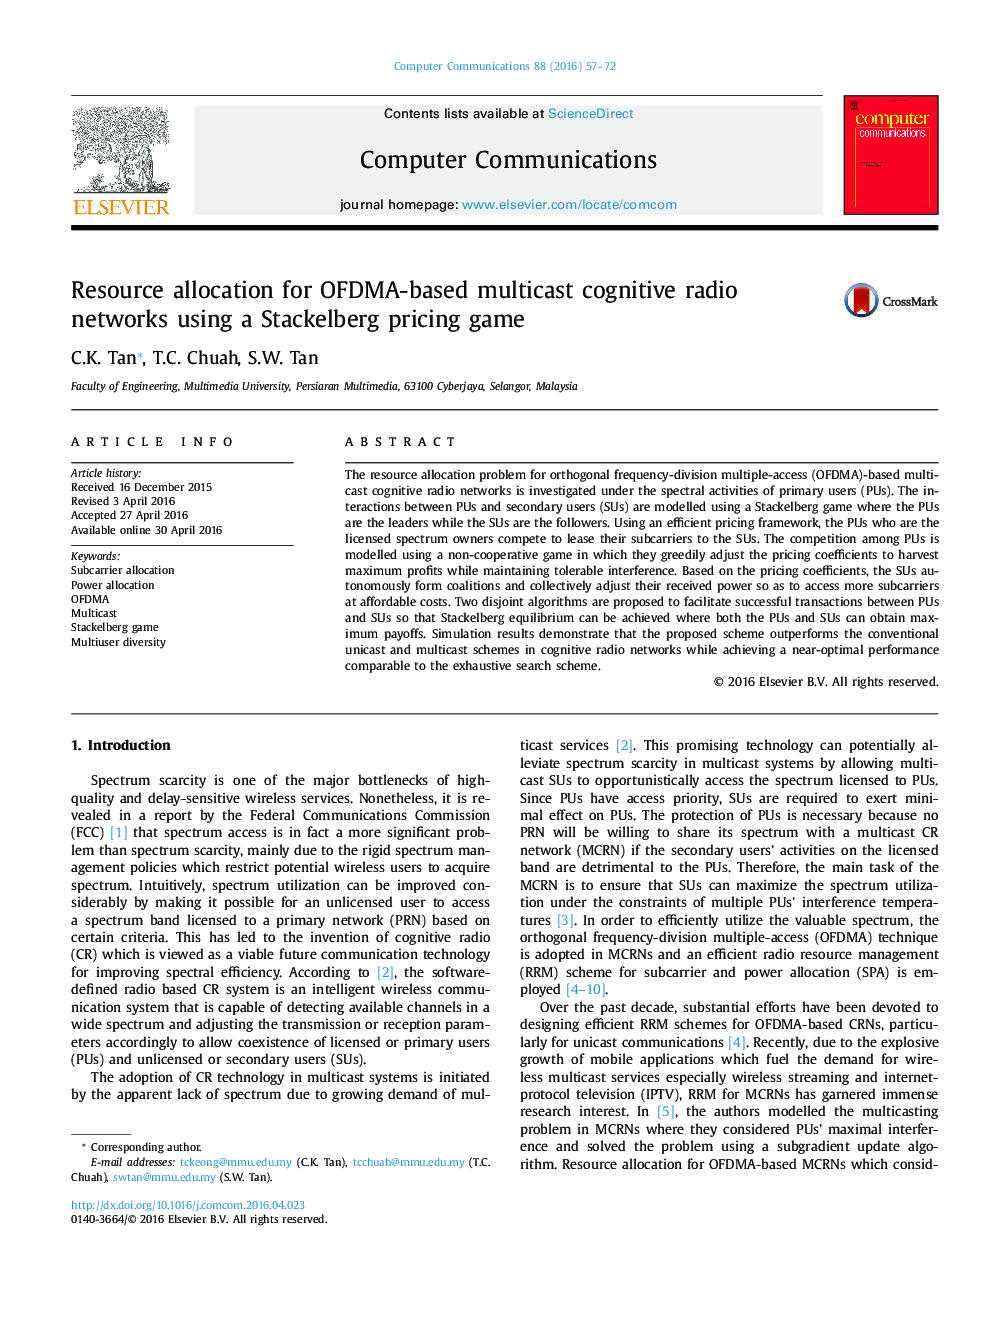 Resource allocation for OFDMA-based multicast cognitive radio networks using a Stackelberg pricing game